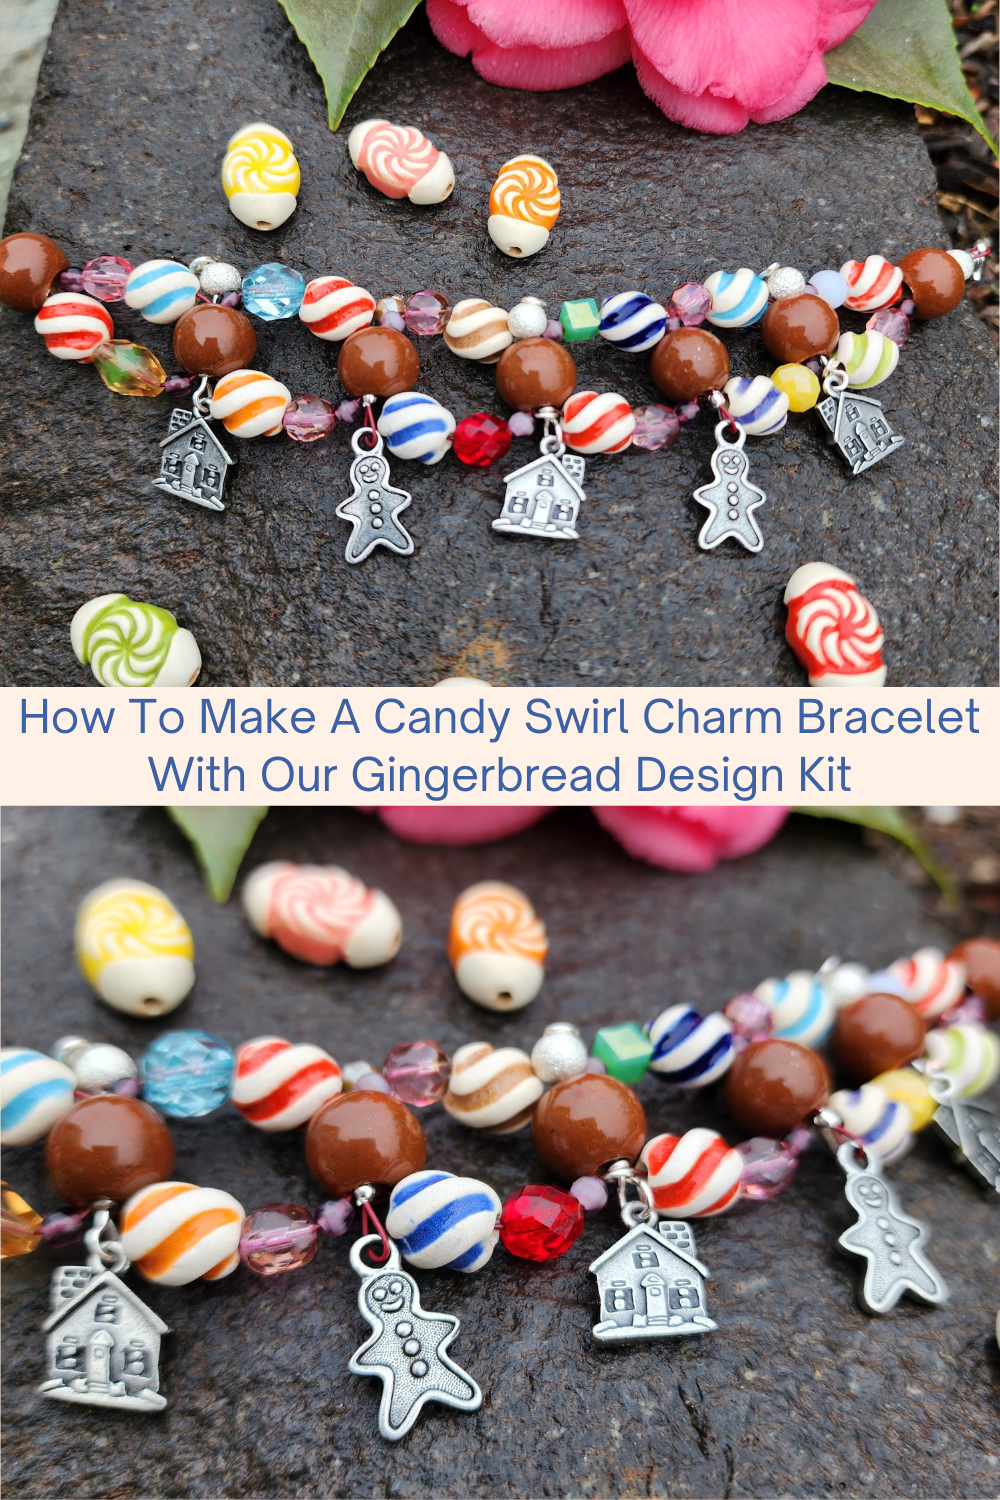 How To Make A Candy Swirl Charm Bracelet With Our Gingerbread Design Kit Collage